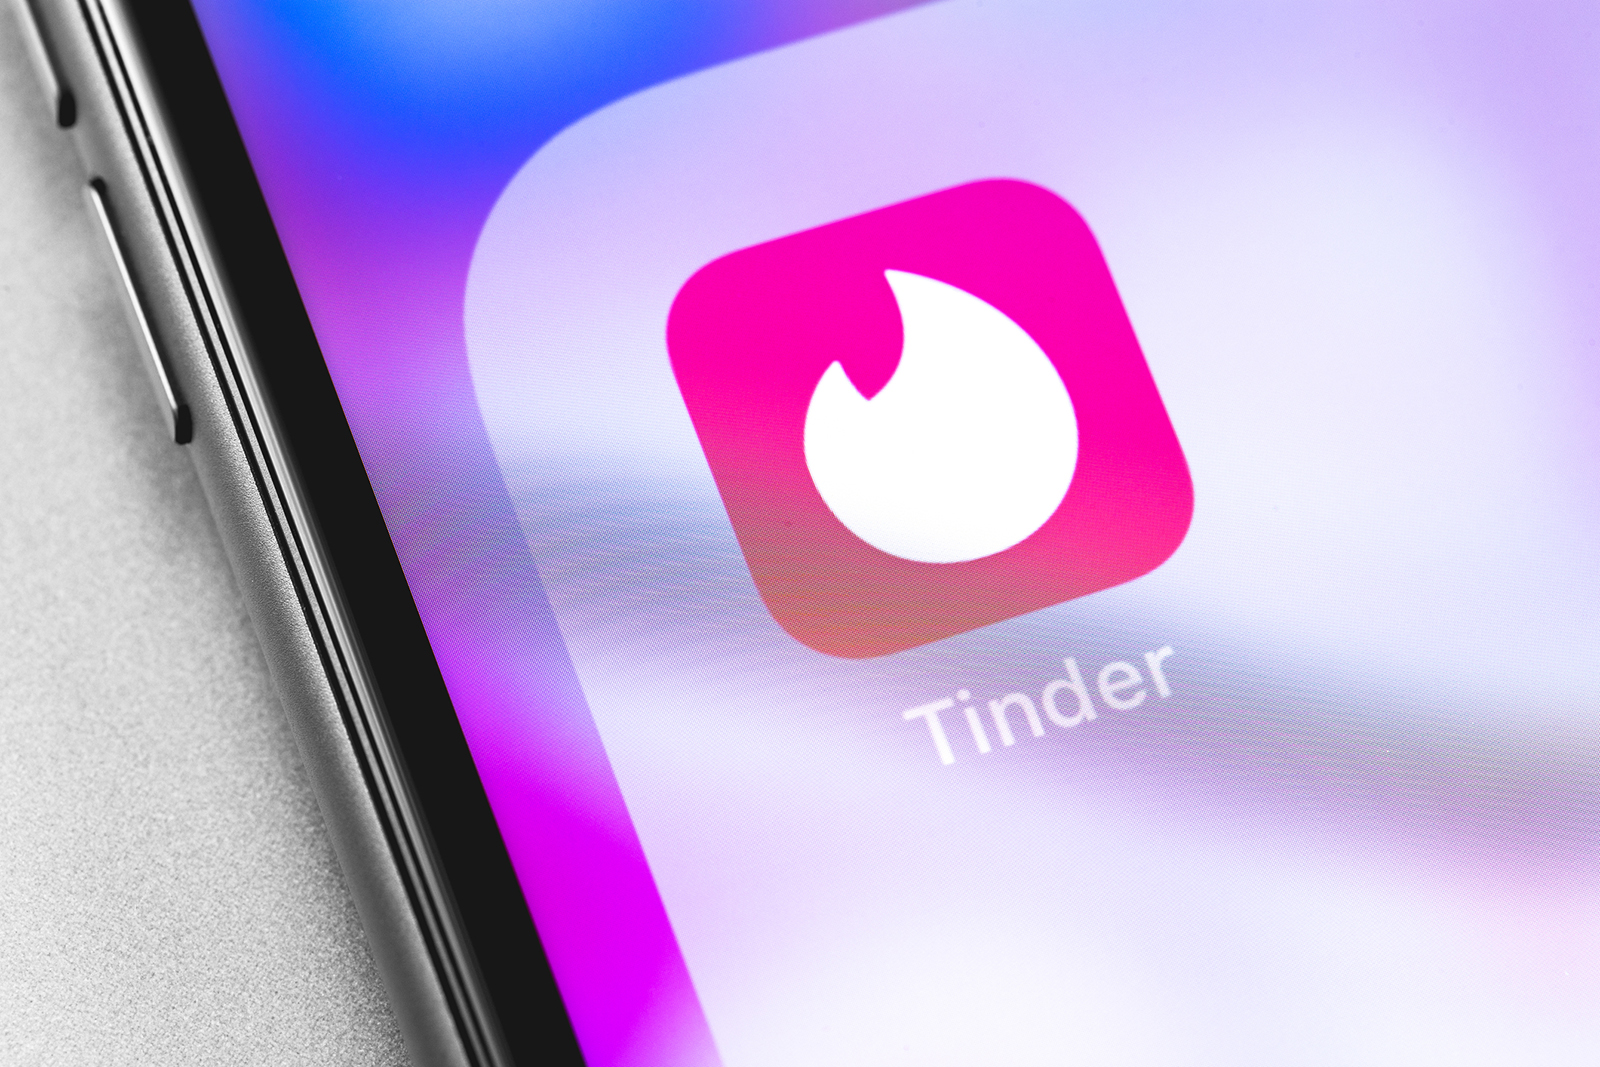 Tinder icon on a smartphone.